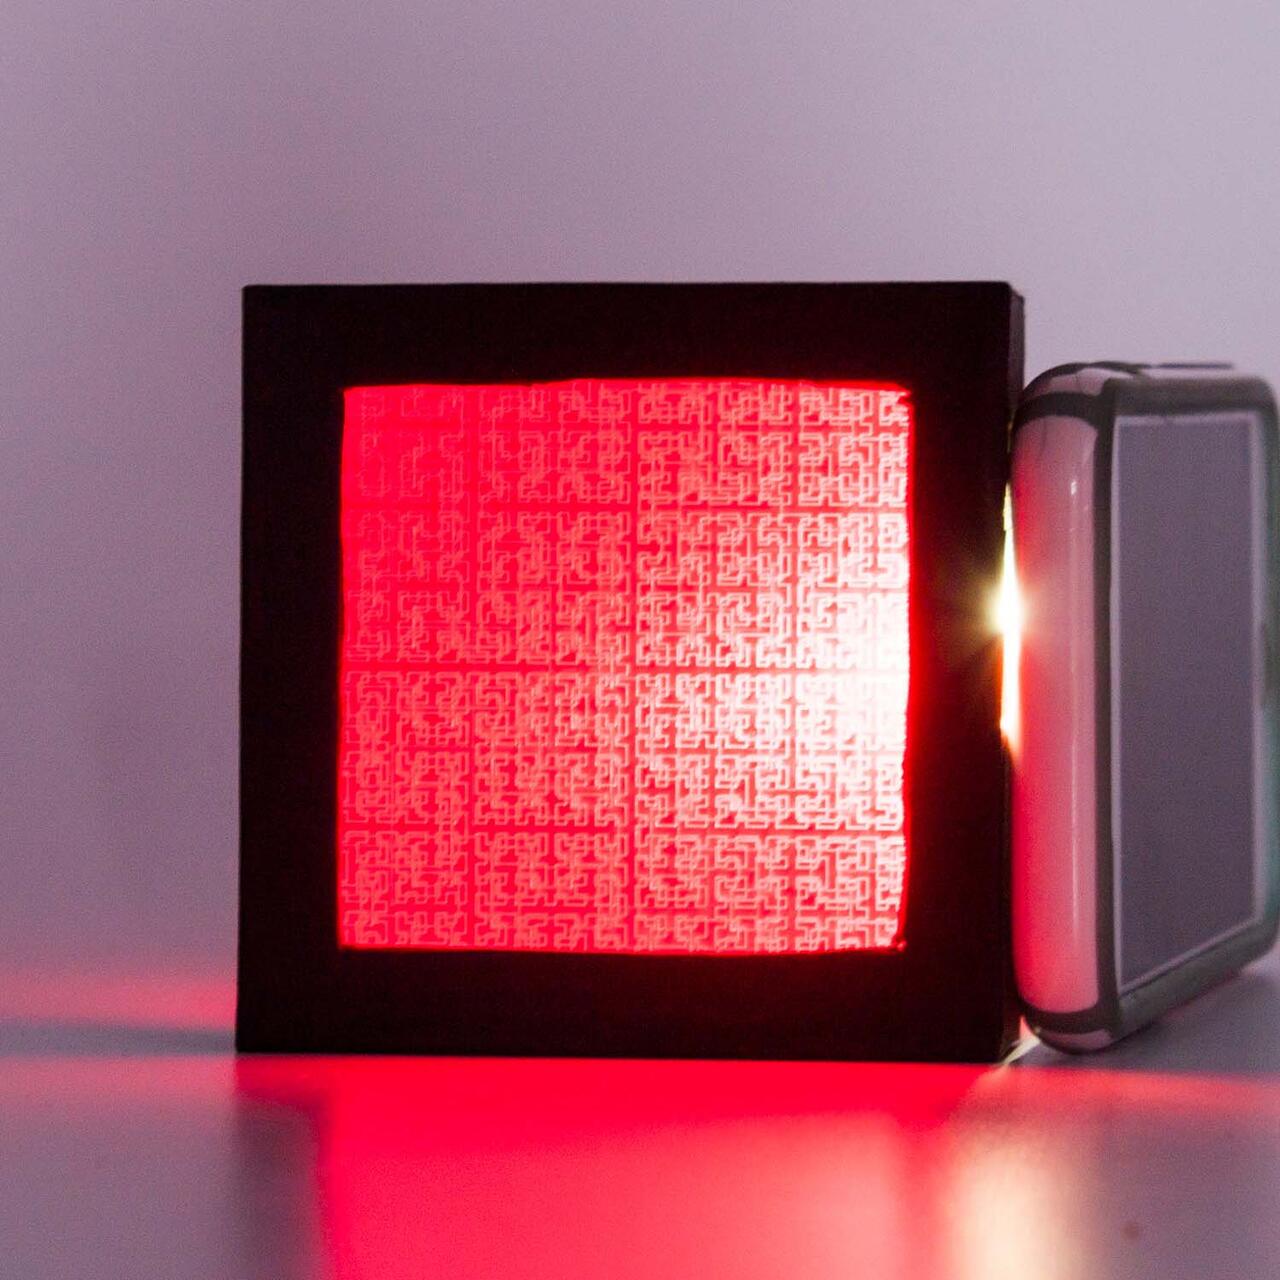 A black frame captures a red screen in which the light source behind it exposes a printed pattern.